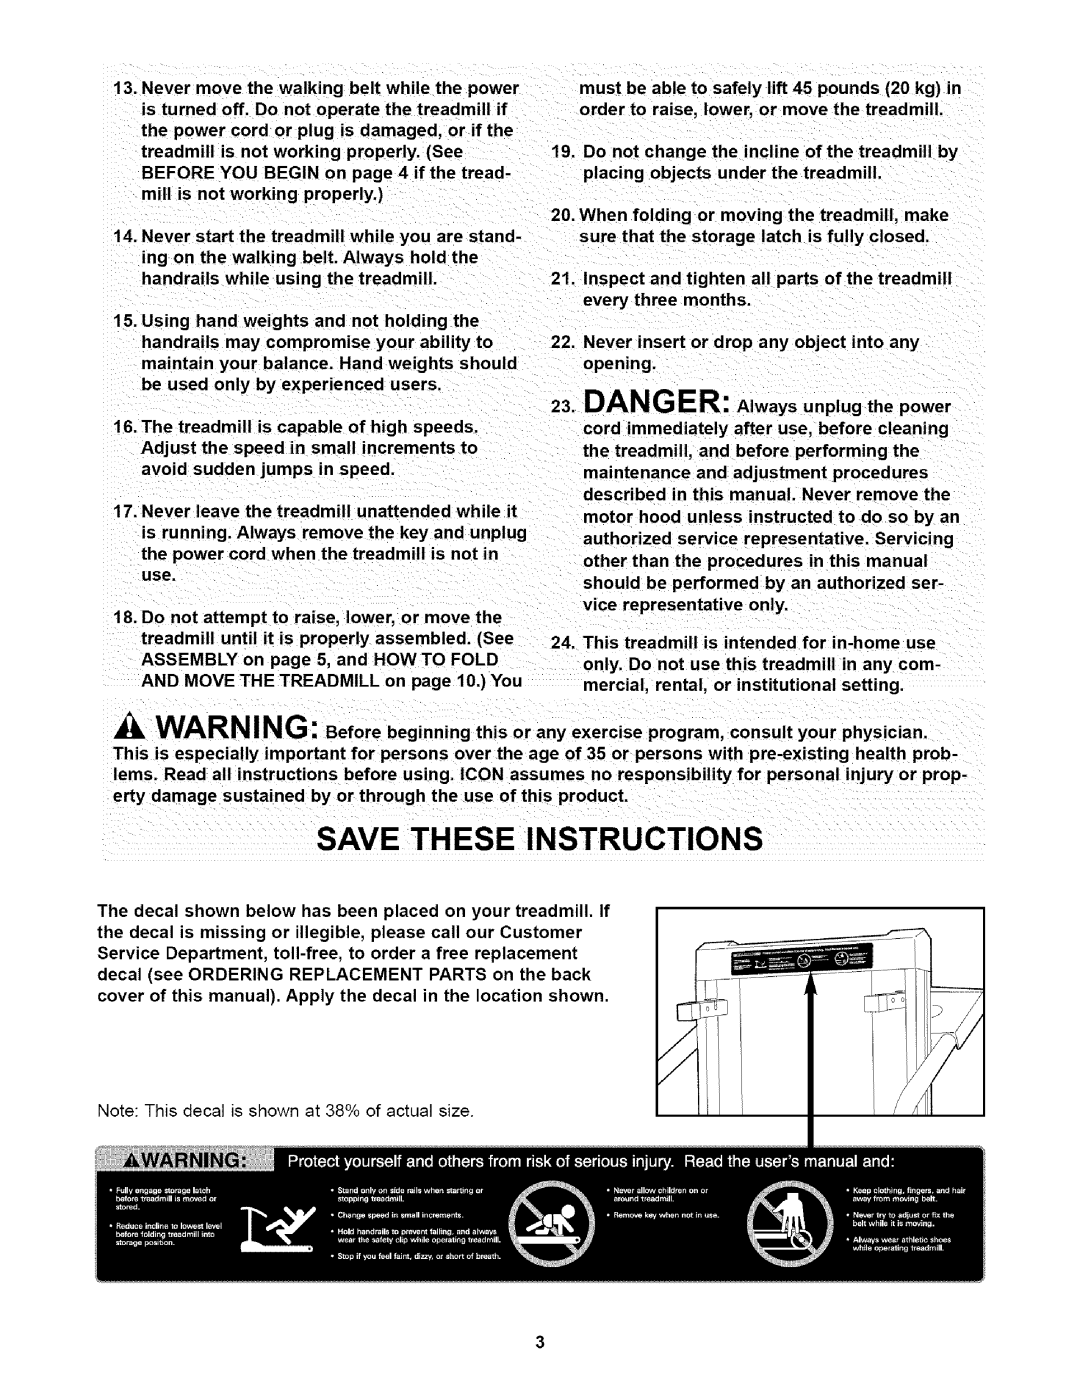 Weslo WLTL29010 user manual Save These Instructions 